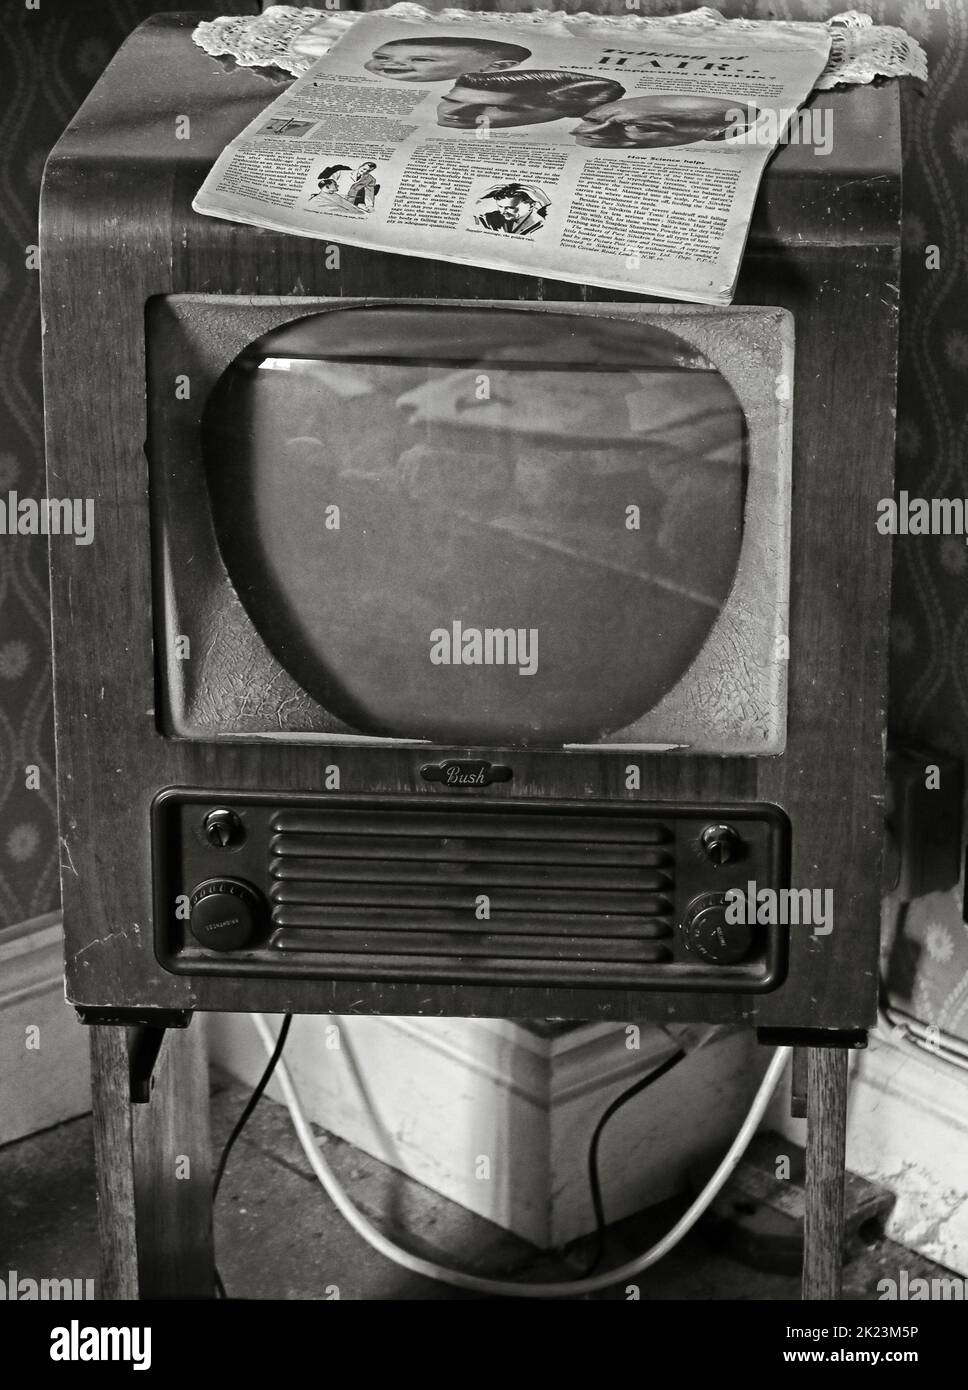 Original Bush, 1960s TV set, 405 line receiver, with Television guide to two channels, resting on top Stock Photo